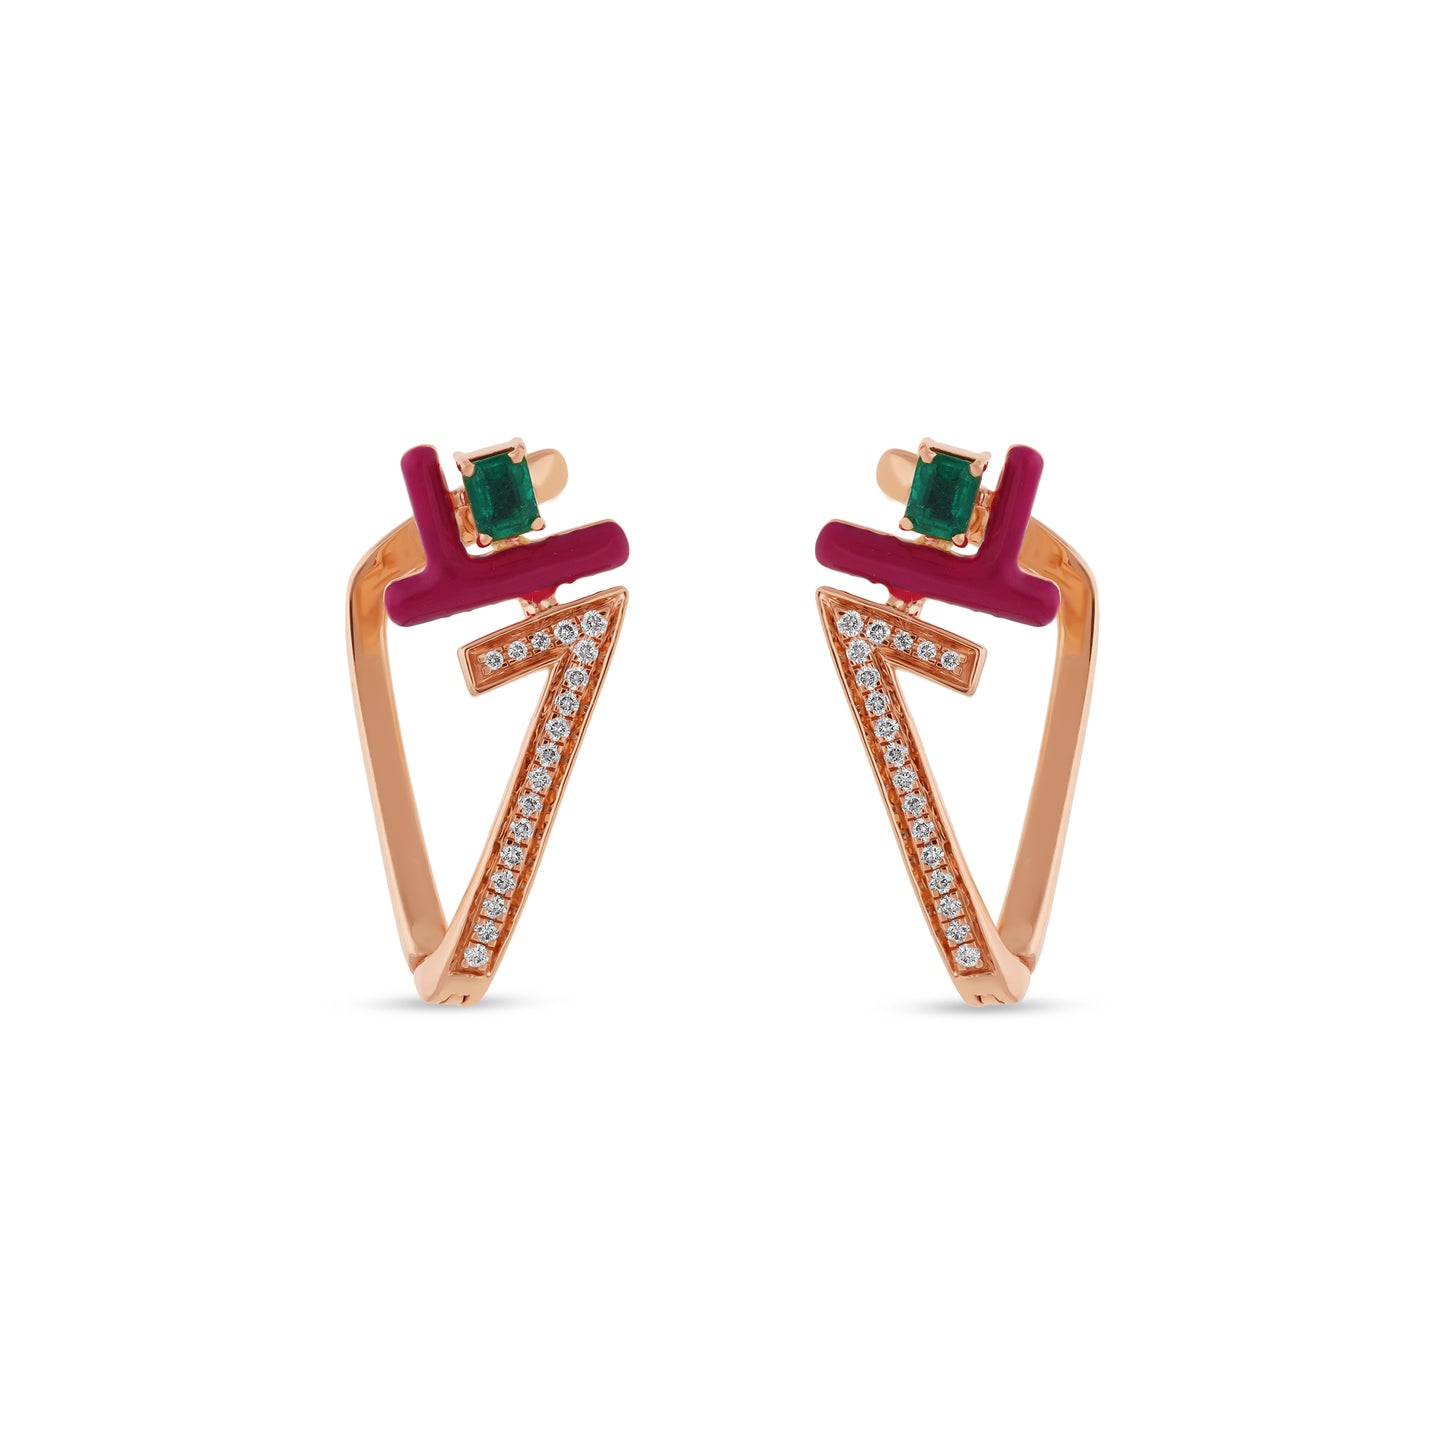 Penrose Triangle Shape Round Natural Diamond With Red Enamel and Malachite Emerald Stone Rose Gold Stud Women Earrings